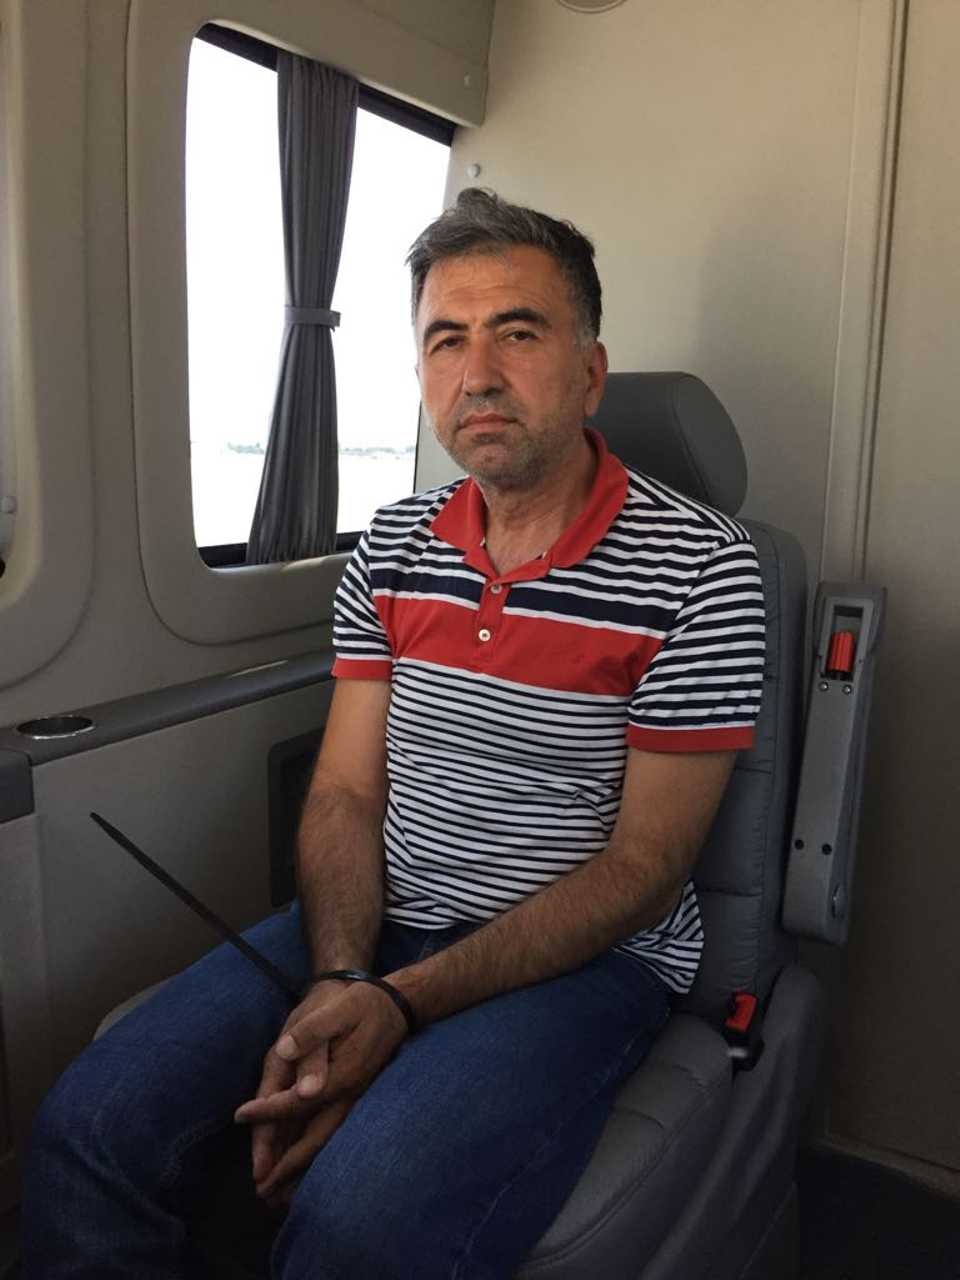 A key FETO suspect, Salih Zeki Yigit, who was captured in Ukraine, was brought to Istanbul by a private plane on July 12, 2018, following operations conducted by the Turkish National Intelligence Organization (MIT)